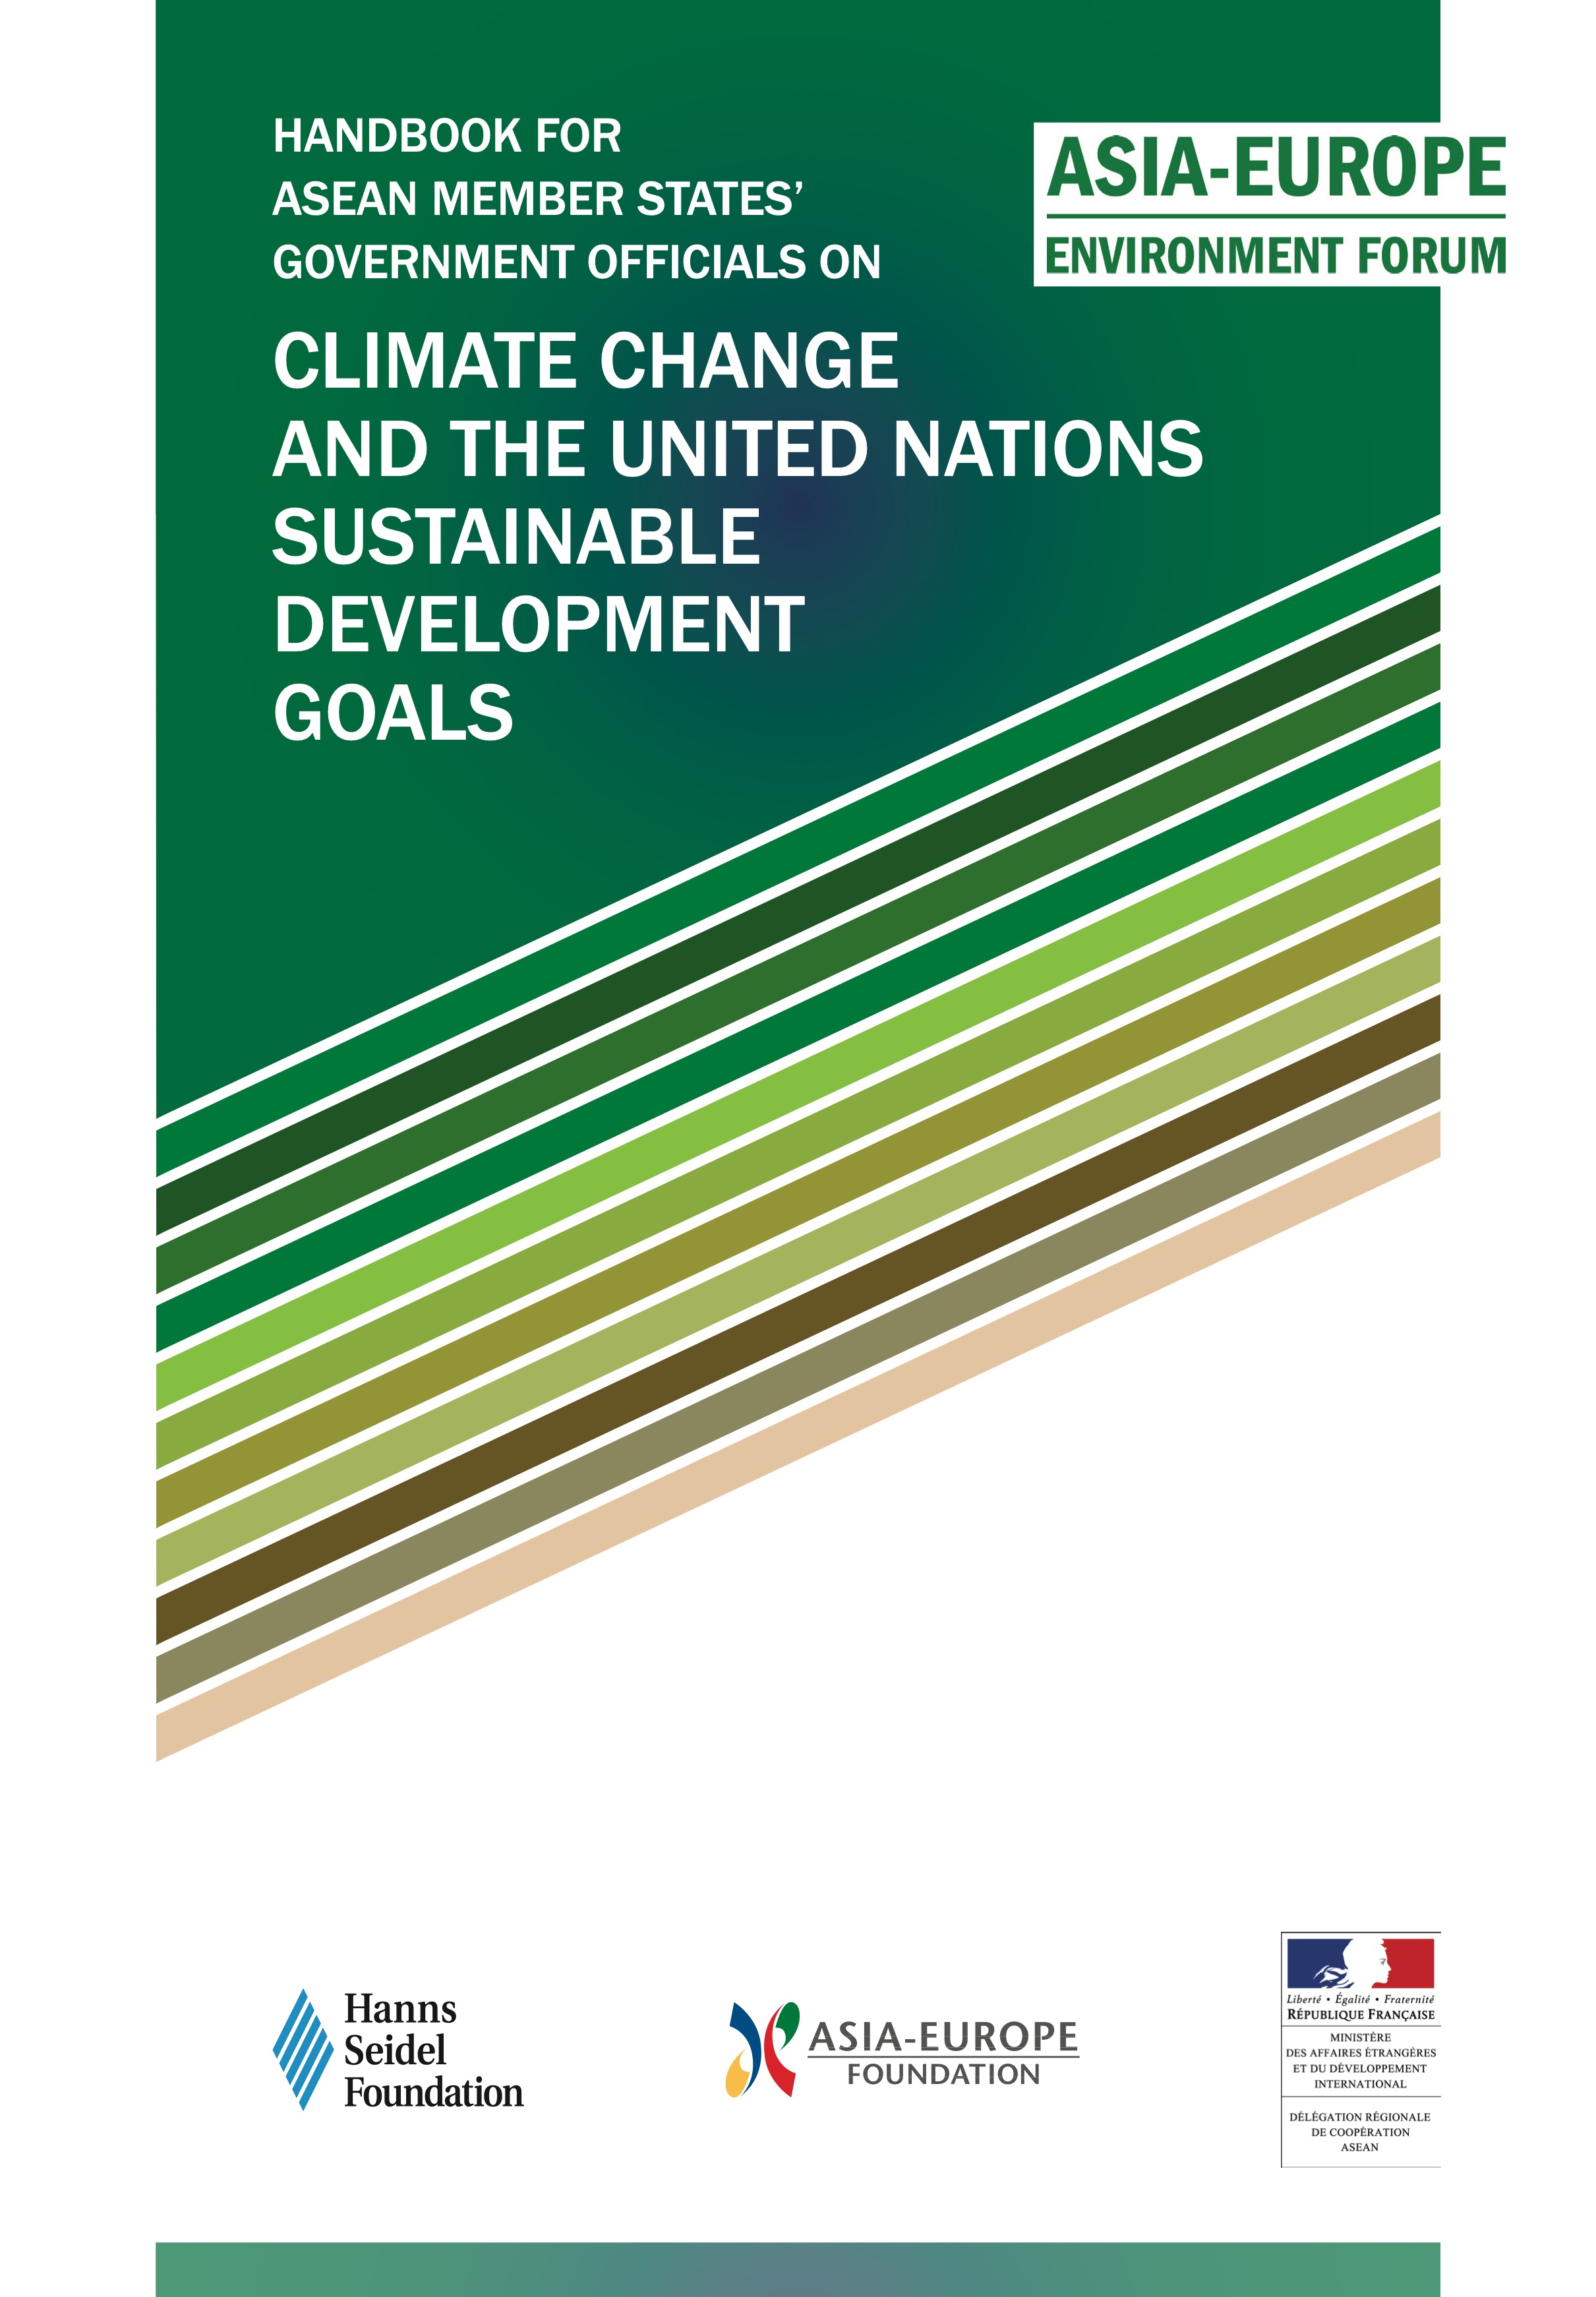 Handbook for ASEAN government officials on Climate Change and the UN Sustainable Development Goals